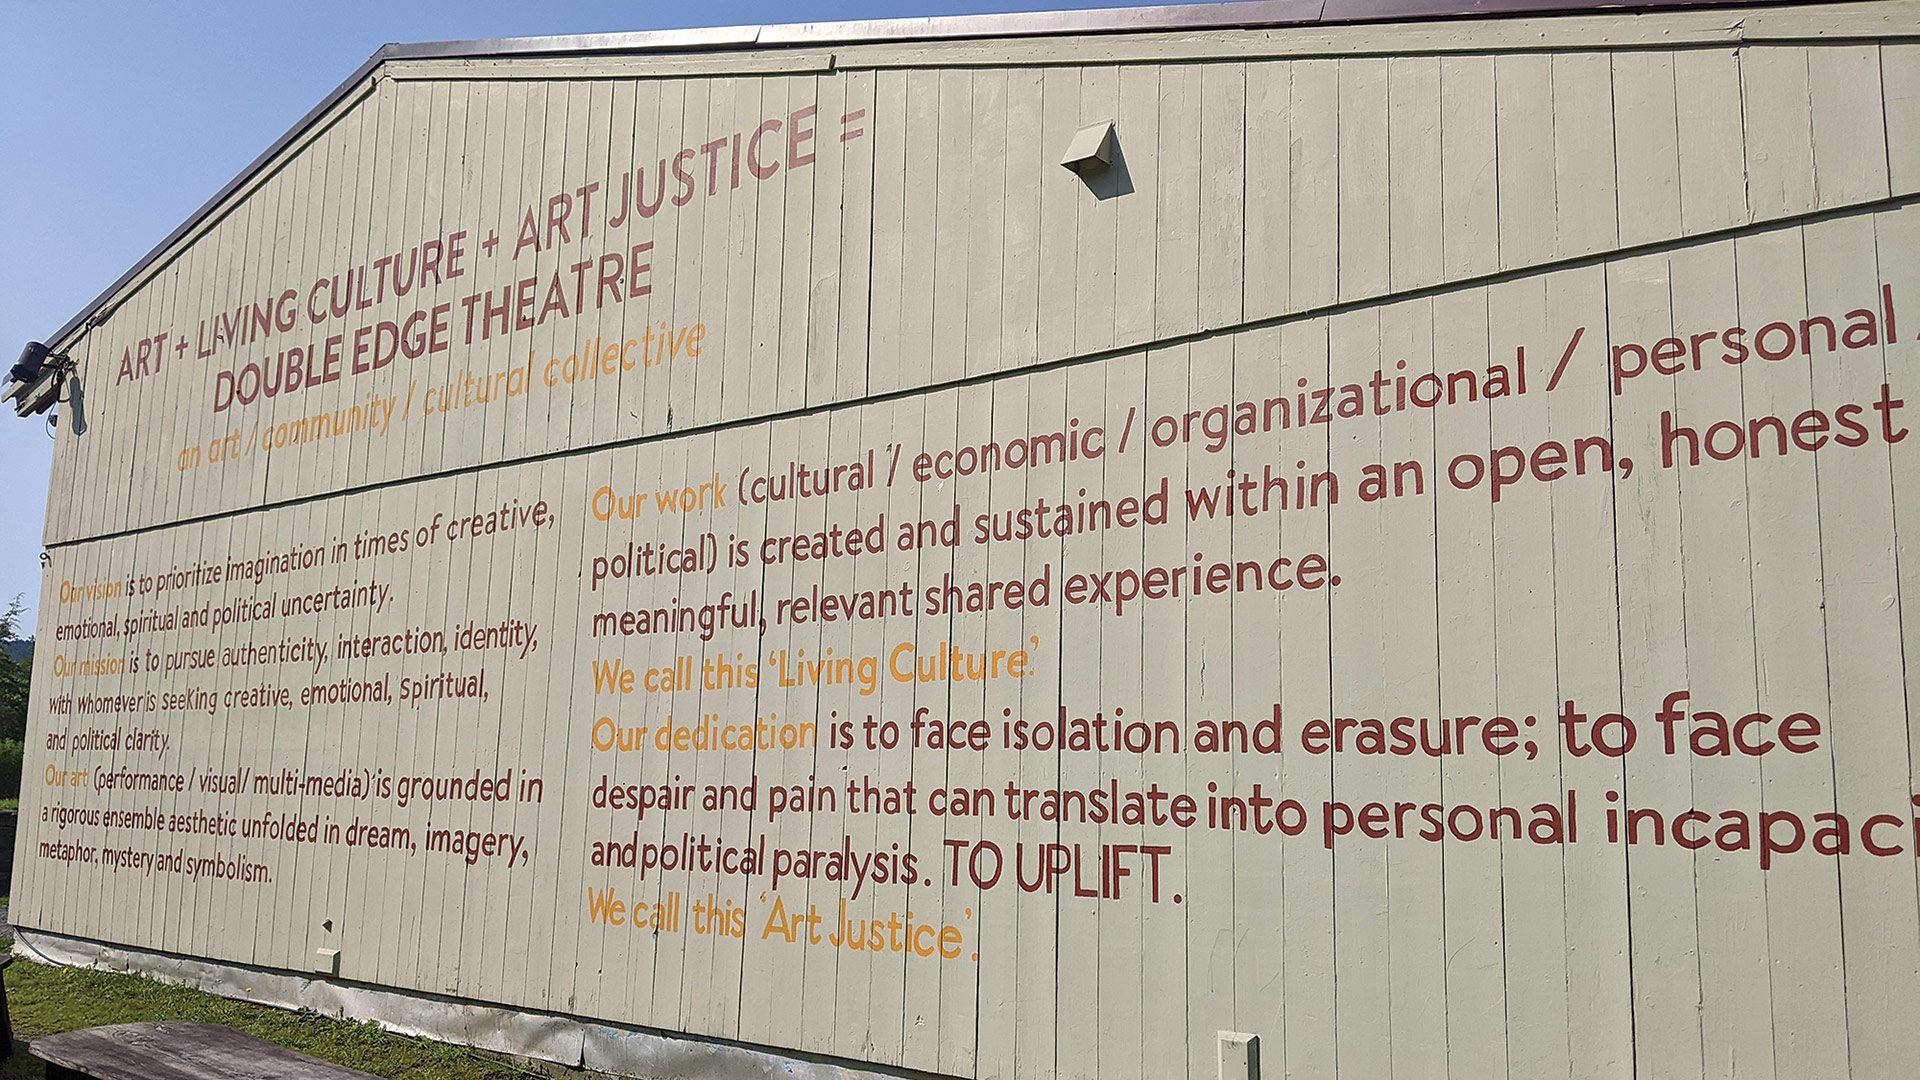 The concepts of ‘living culture’ and ‘art justice’ 